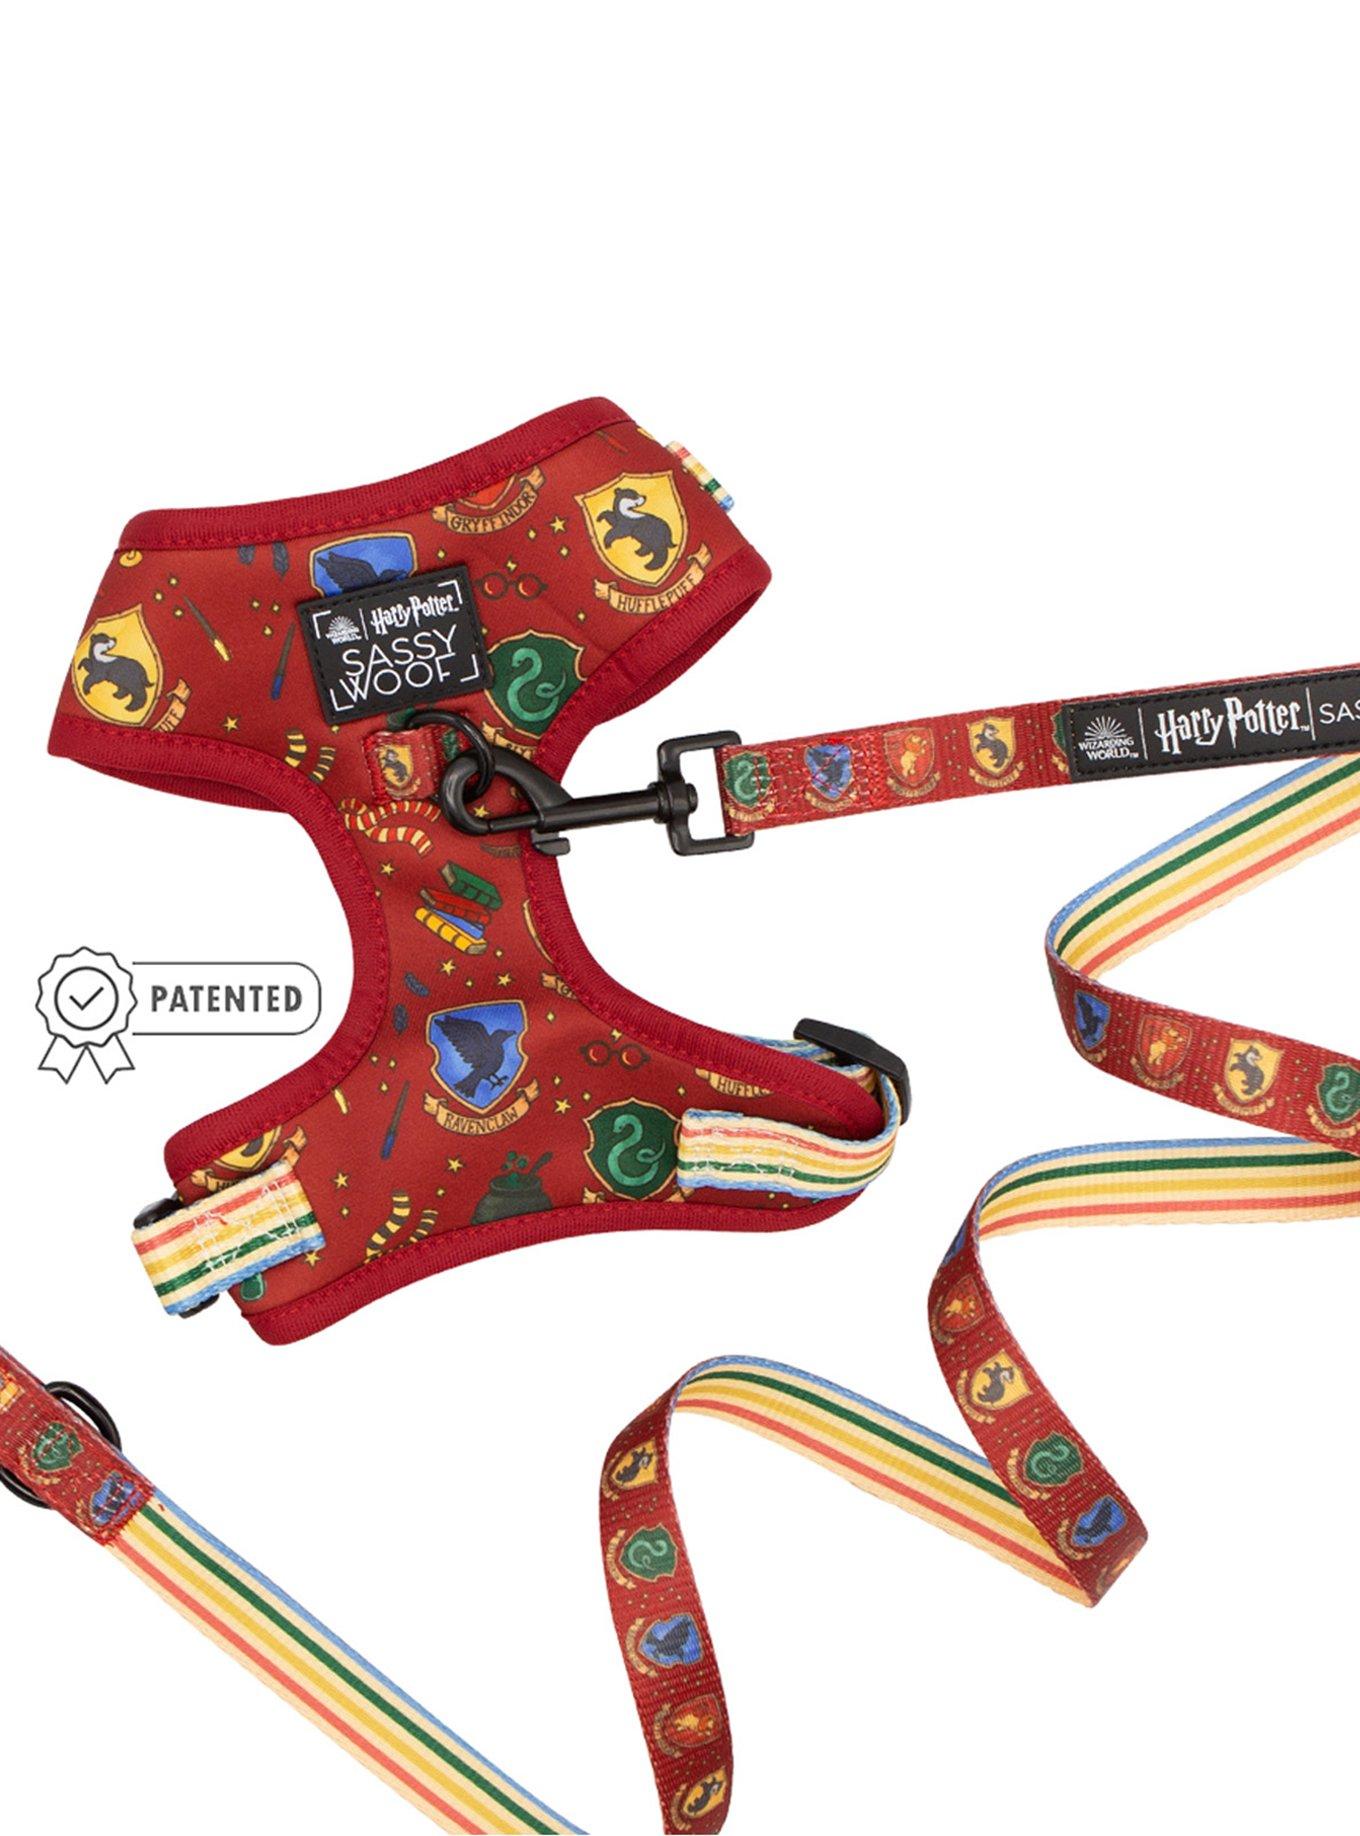 Harry Potter x Sassy Woof Dog Harness and Leash Bundle, RED, hi-res